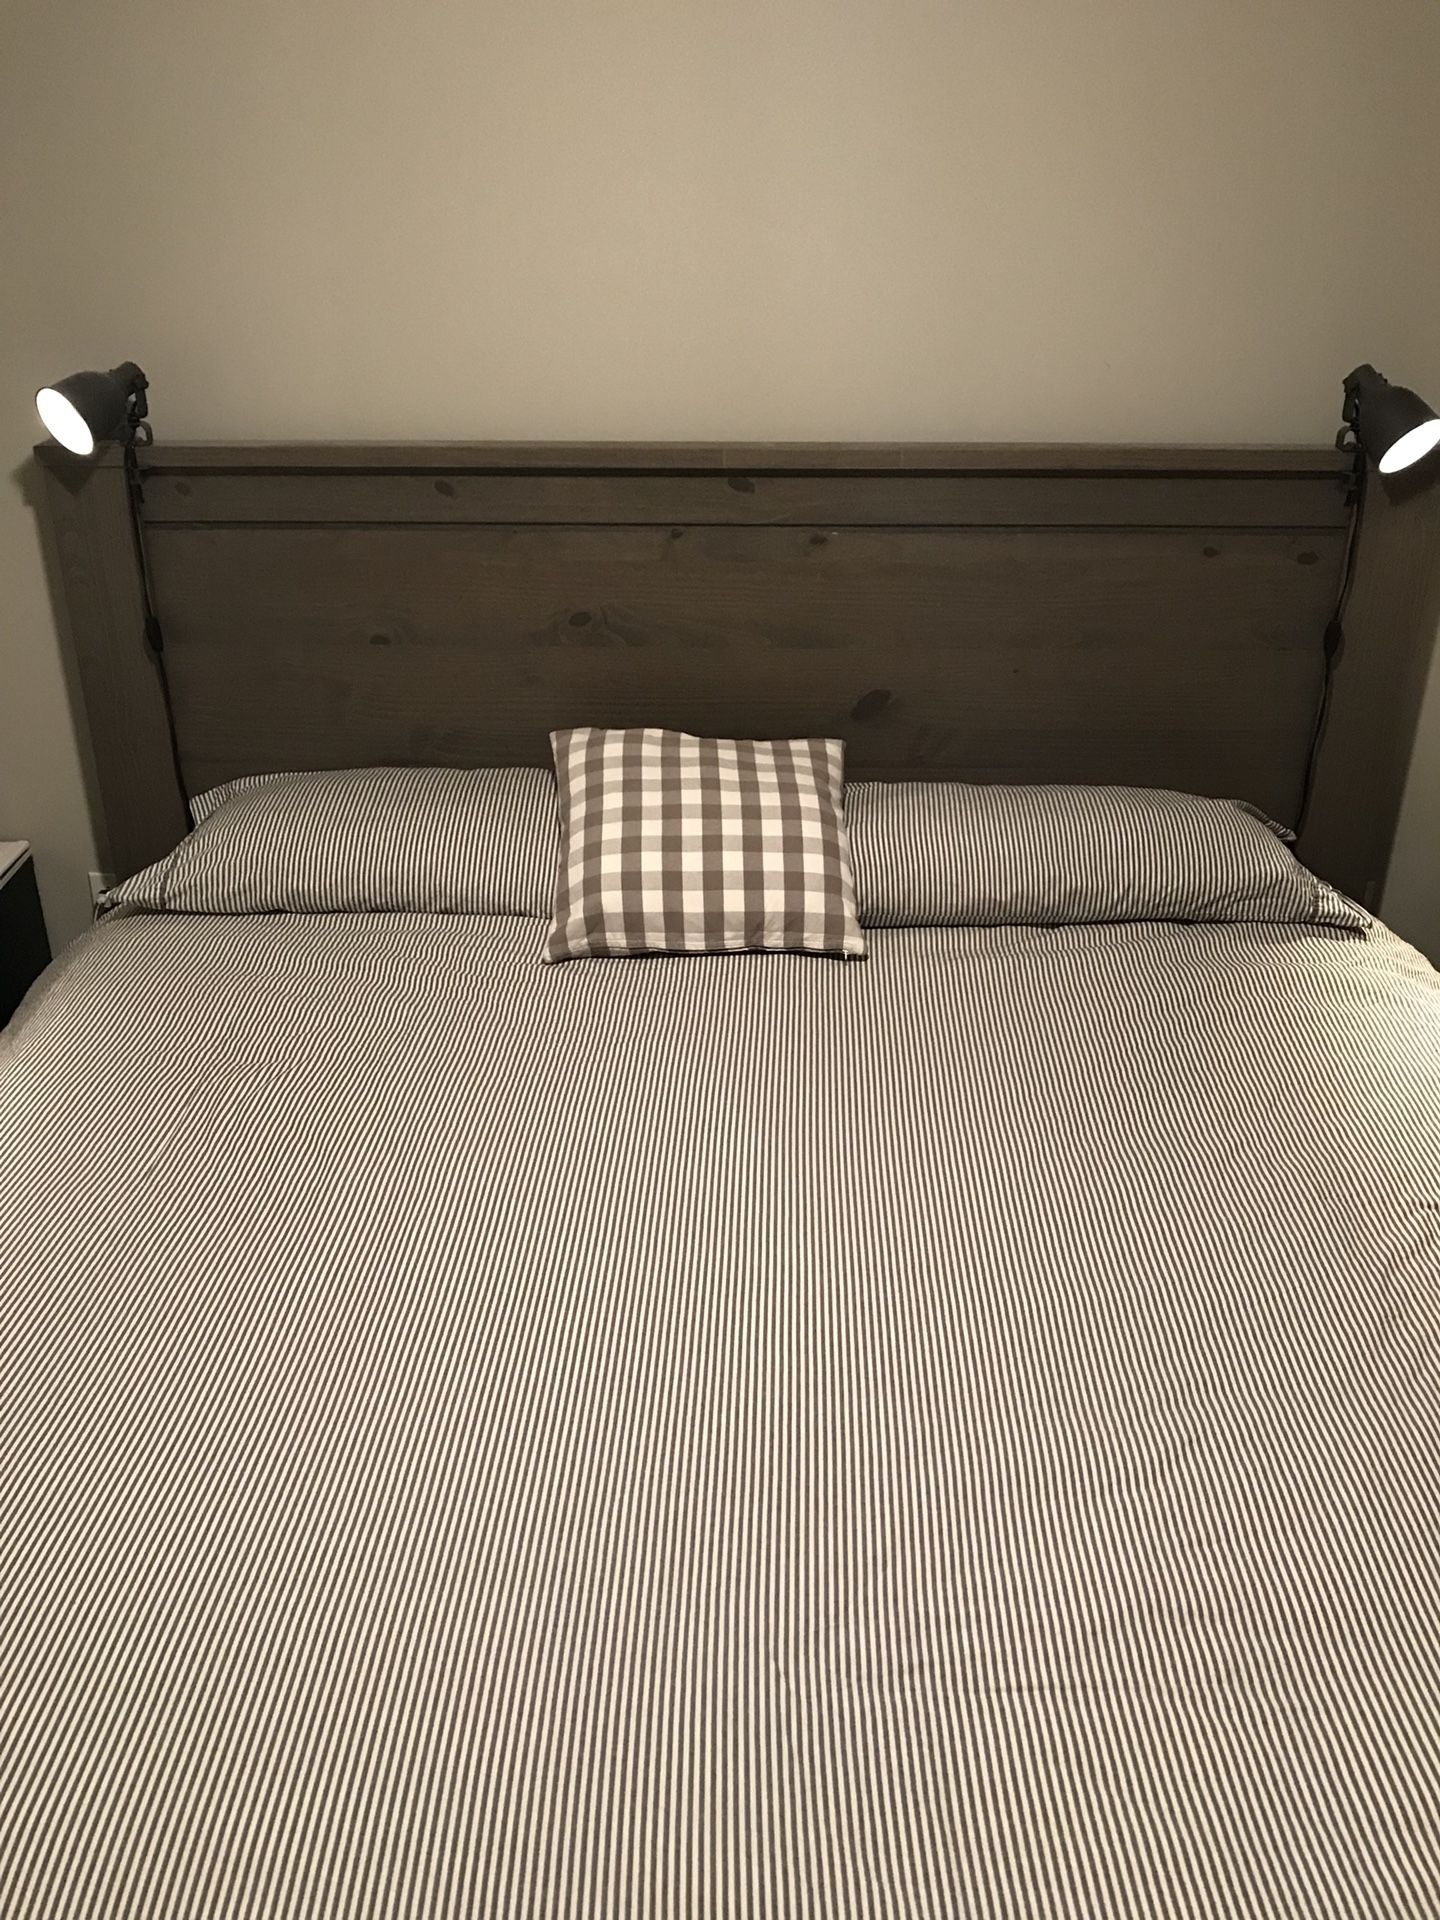 King Size Bed Frame And Foam Mattress, King Size Bed Los Angeles